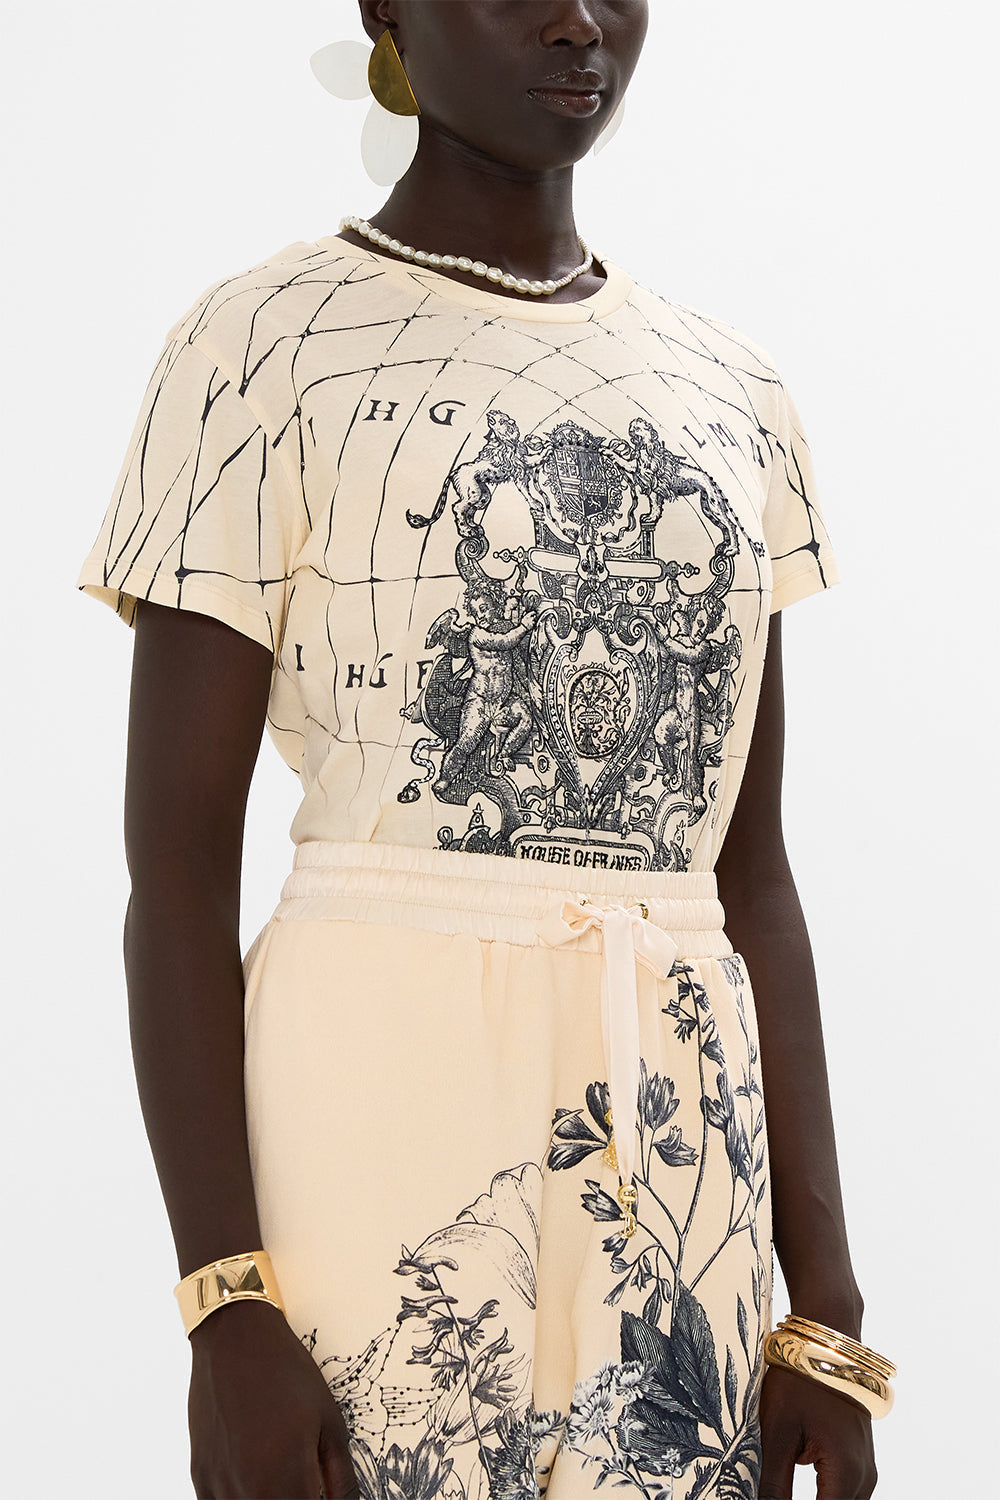 CAMILLA embellished t shirt in Etched Into Eternity print